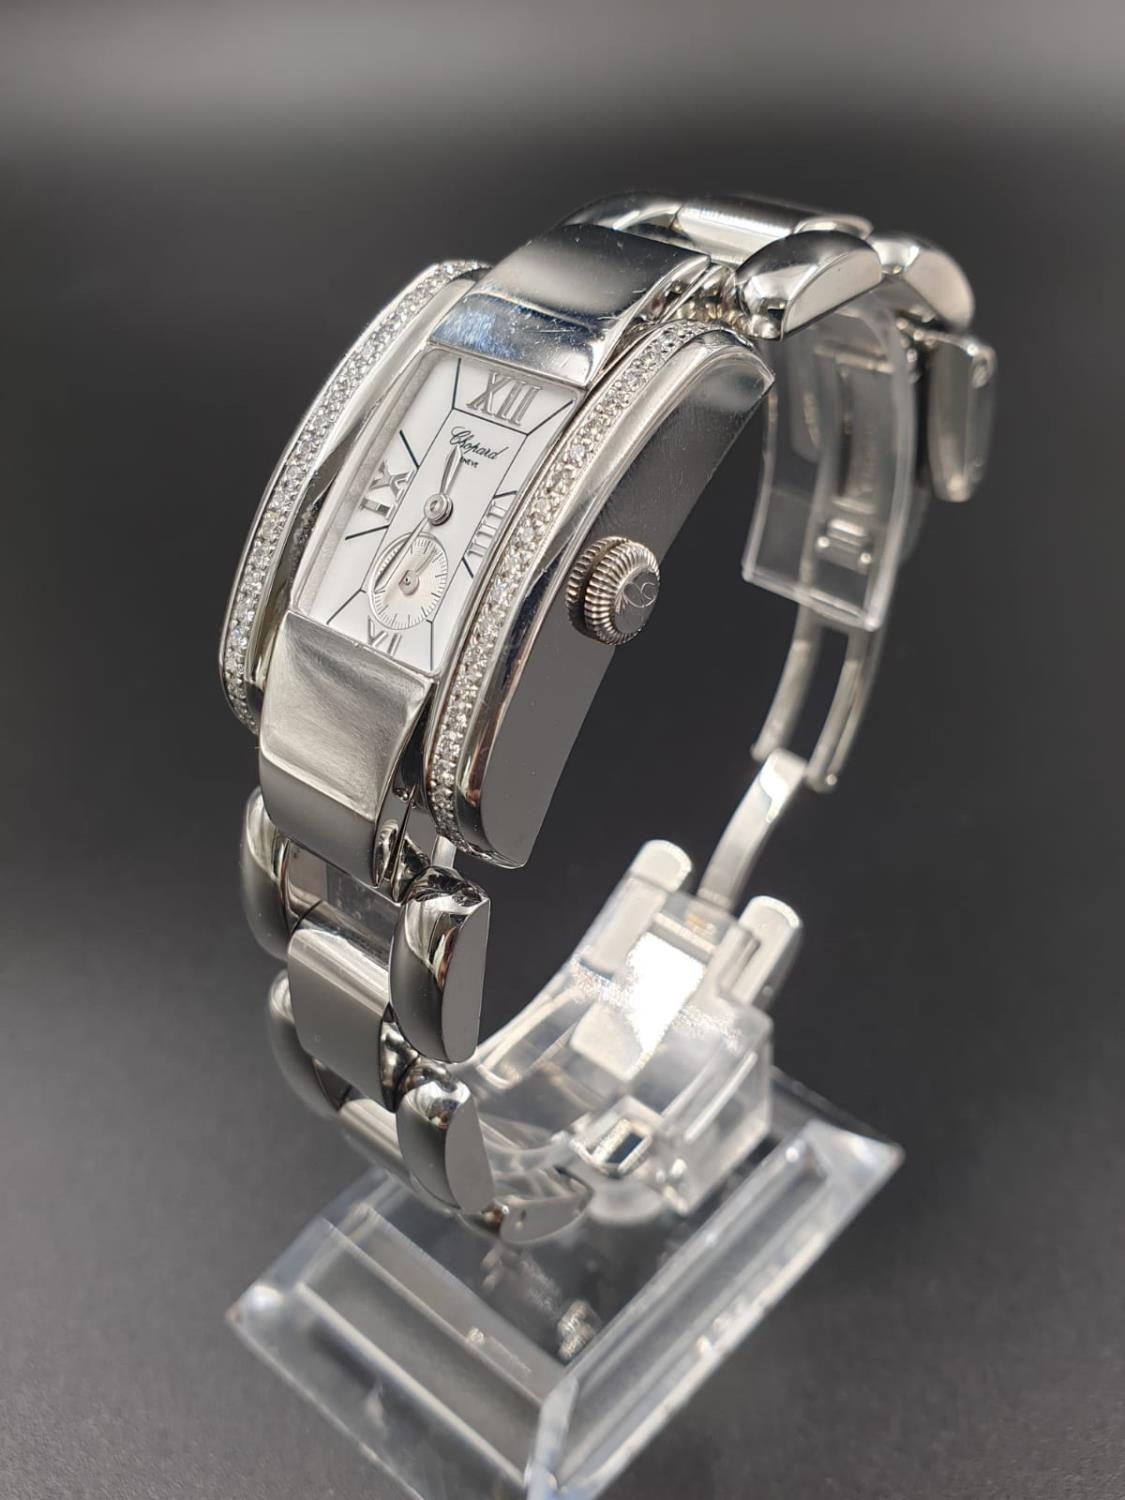 A CHOPARD OF GENEVA LADIES WRIST WATCH WITH DIAMOND ENCRUSTED SHOULDERS, AS NEW. QUARTZ MOVEMENT - Image 2 of 12